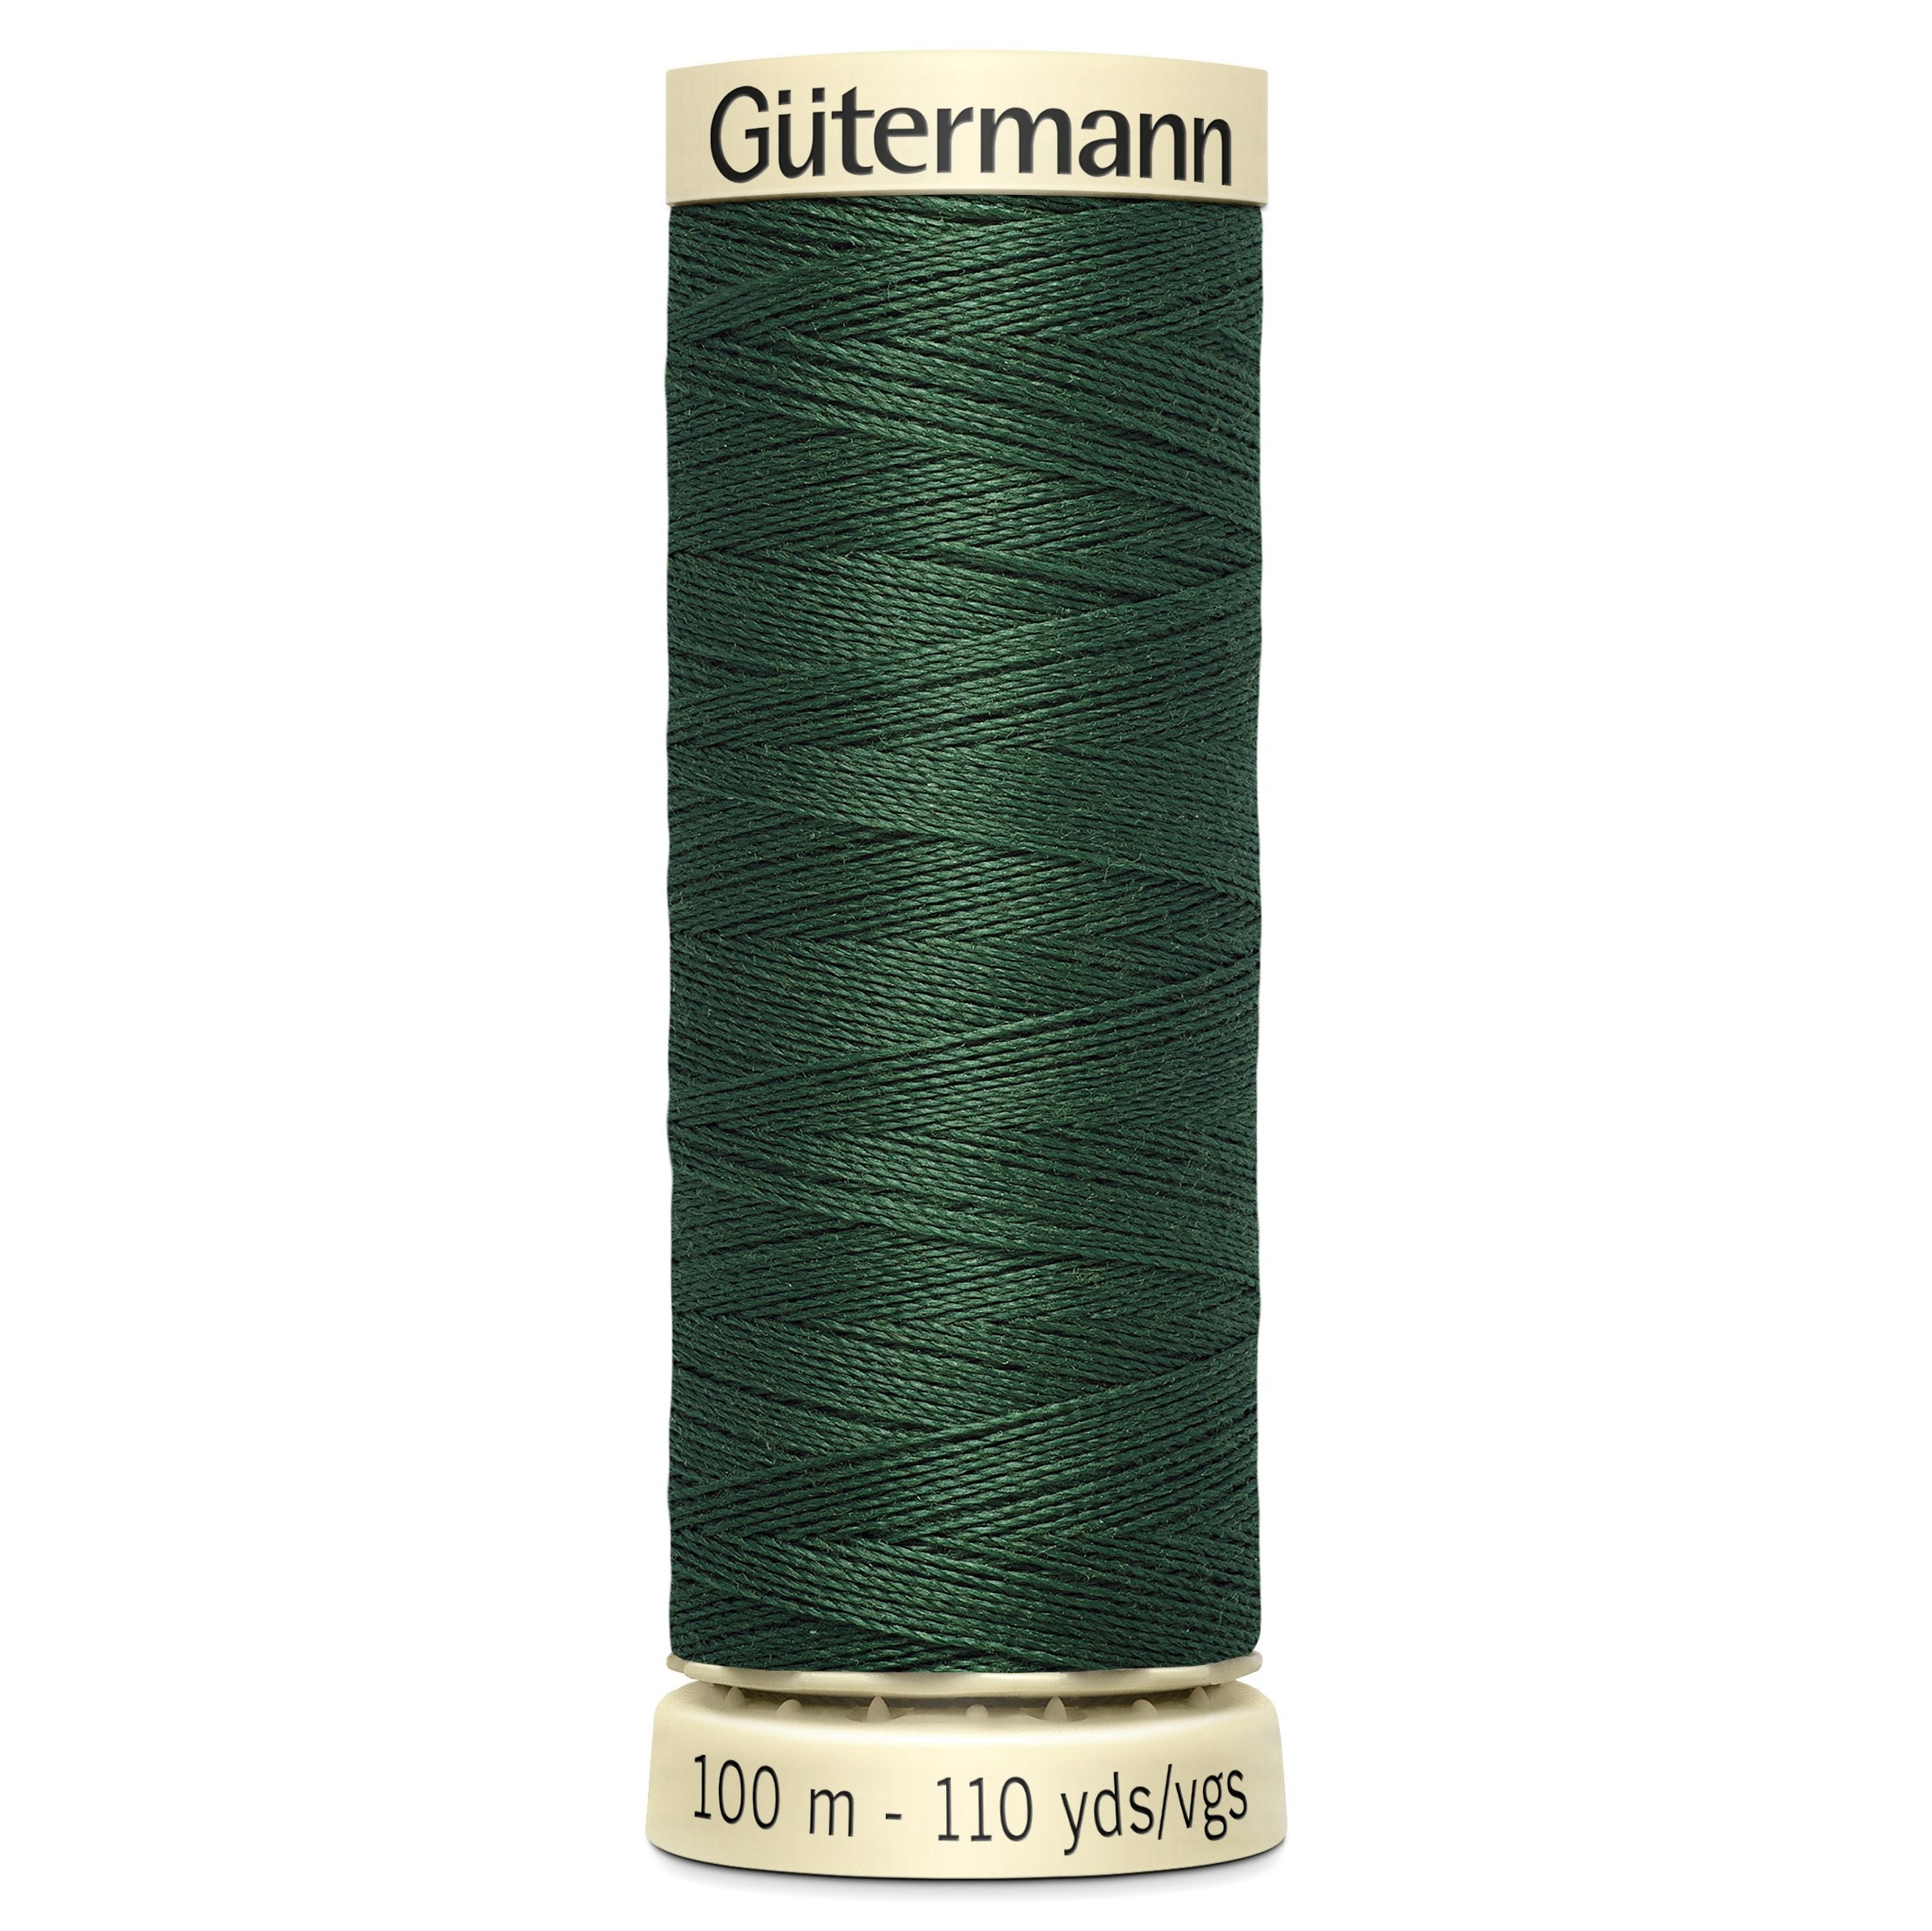 Gutermann Sew All Thread colour 555 Dark Green from Jaycotts Sewing Supplies